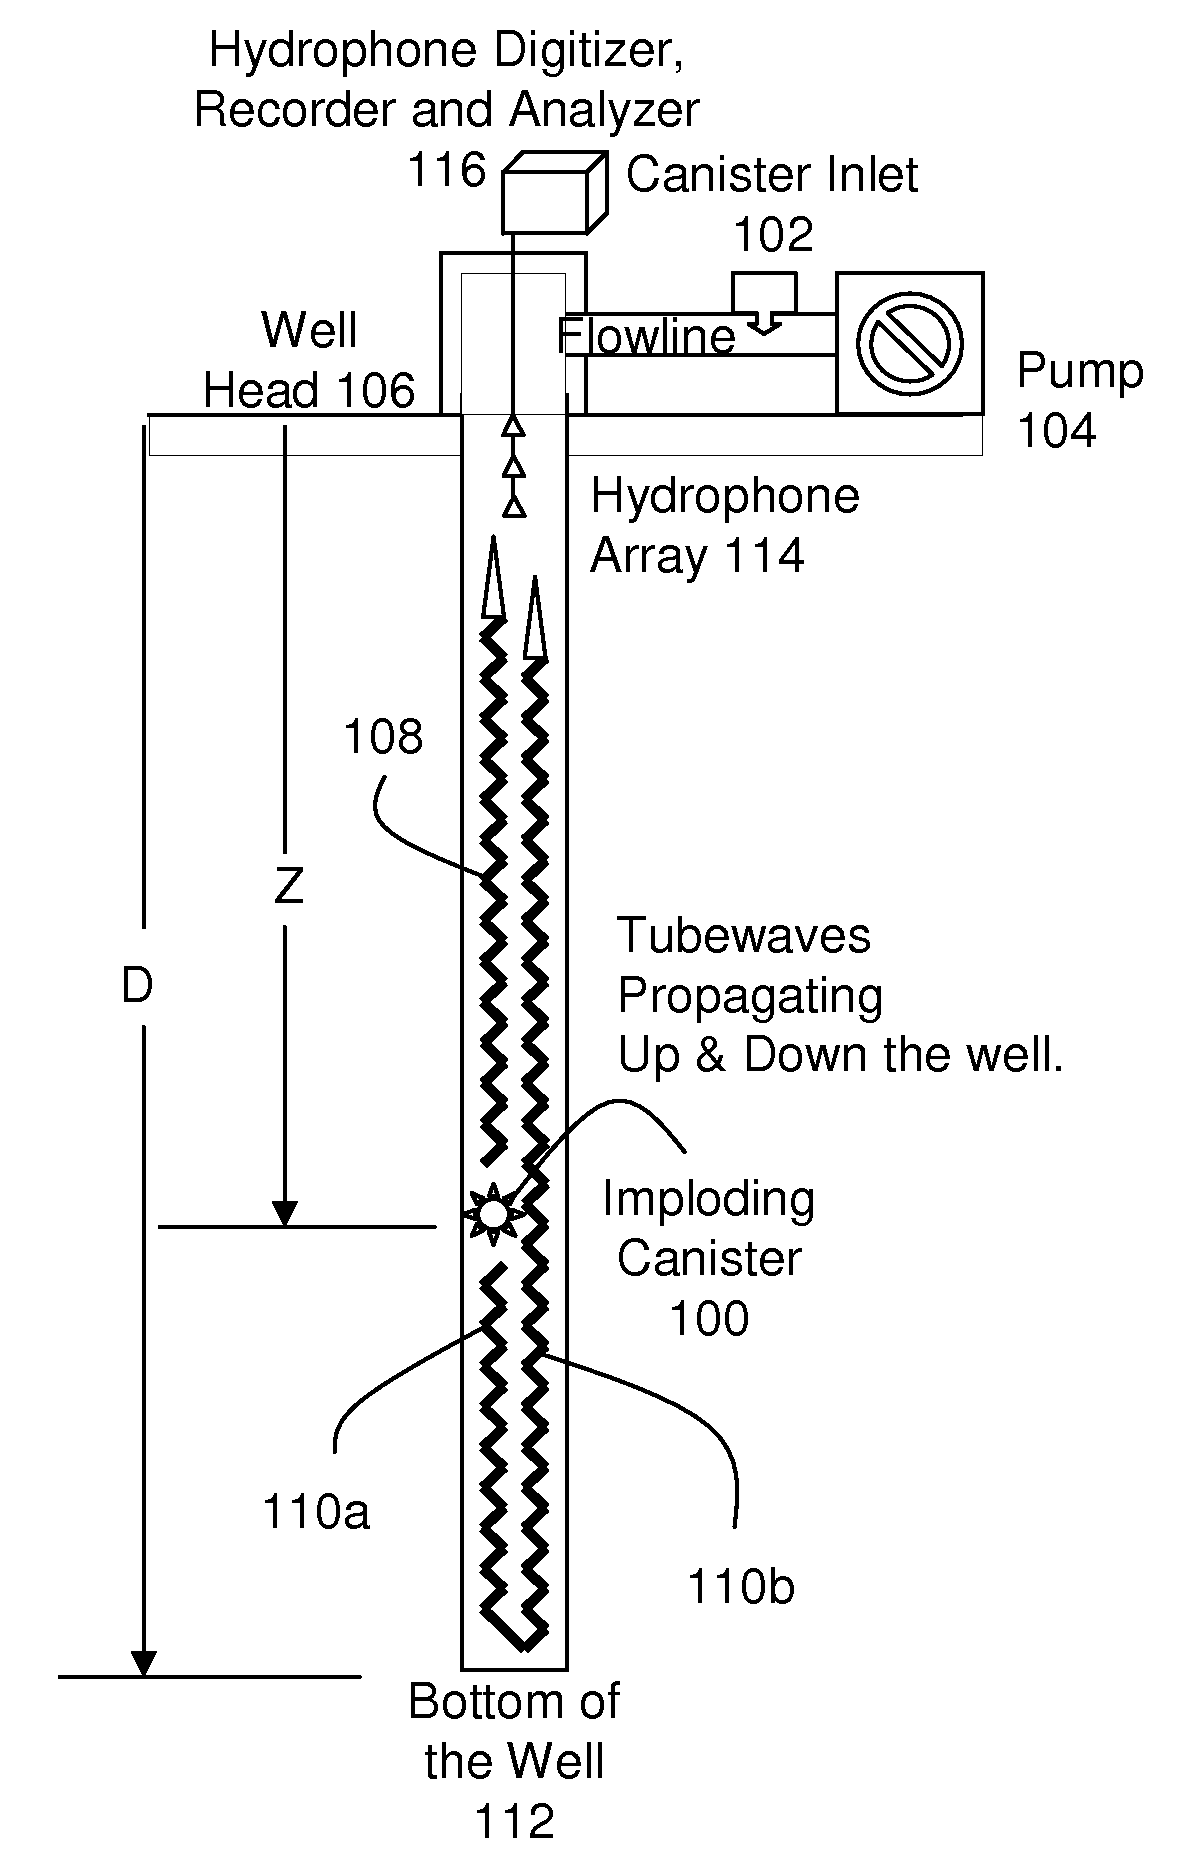 Determination of downhole pressure while pumping